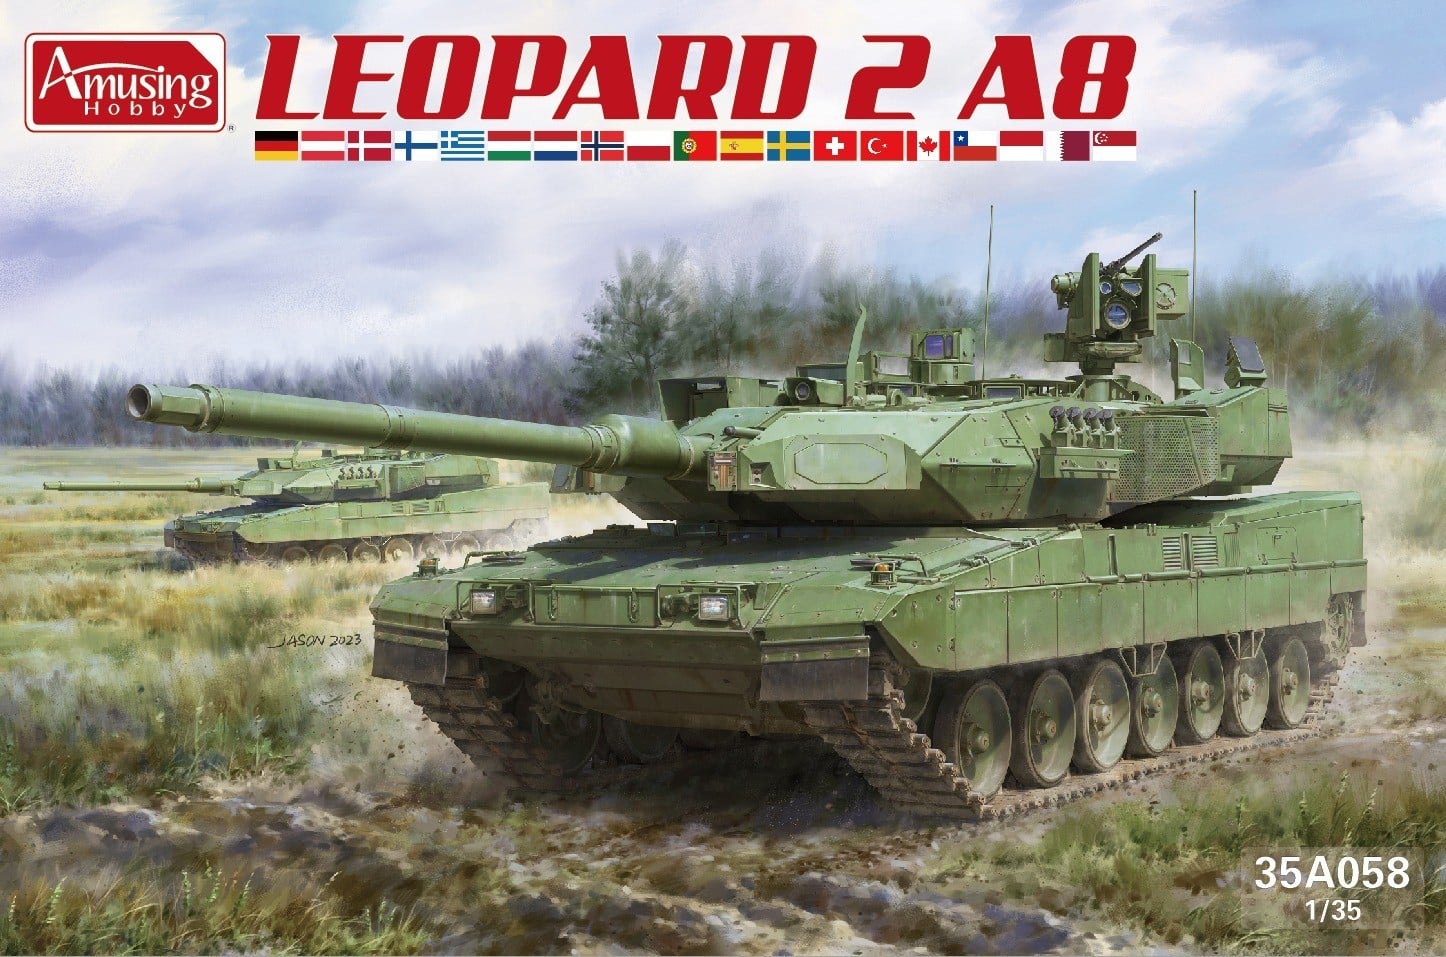 Leopard 2A8 from Border